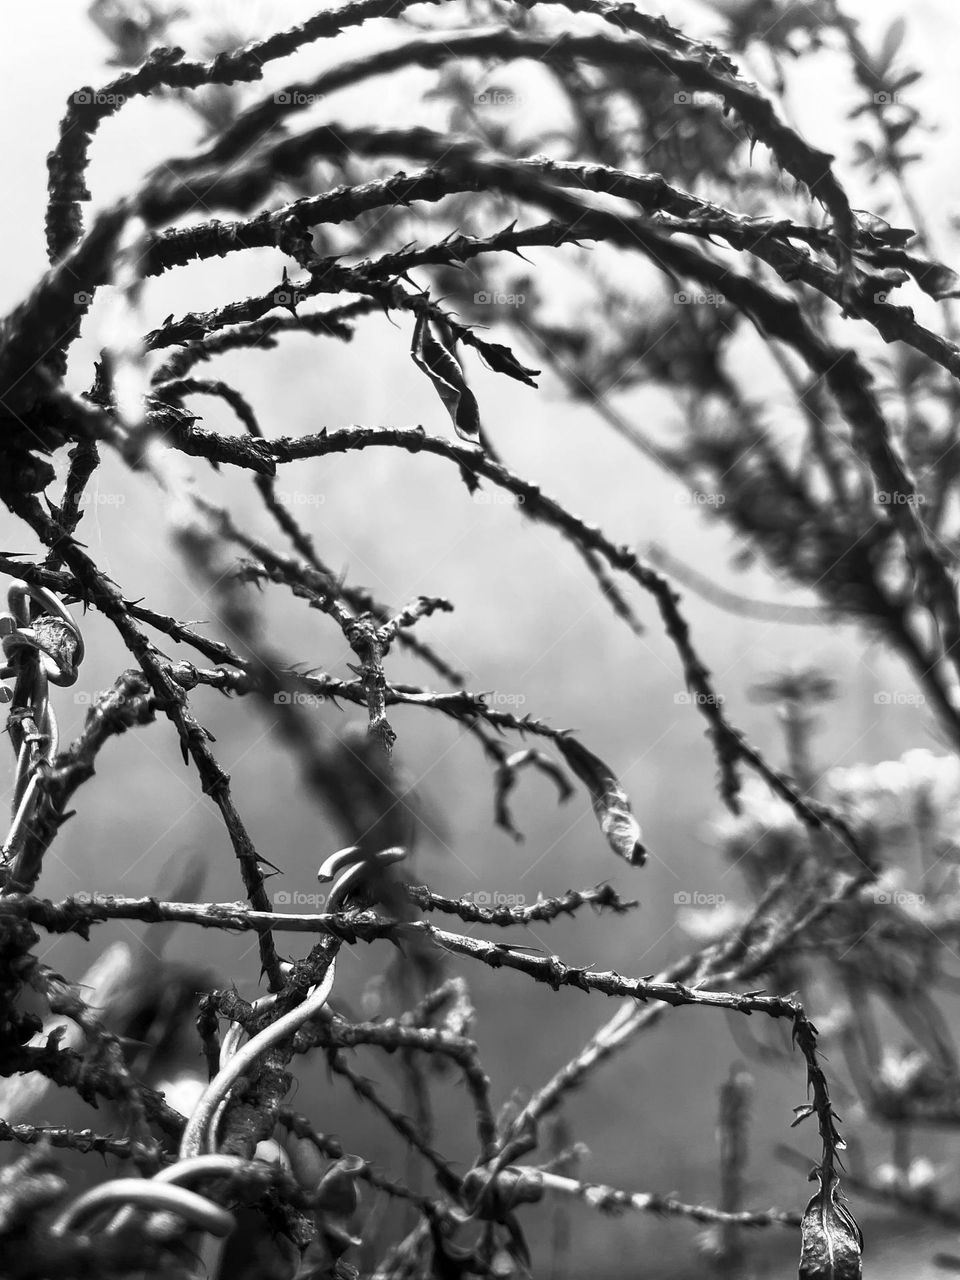 The view of a dry branches of a plant in black and white 